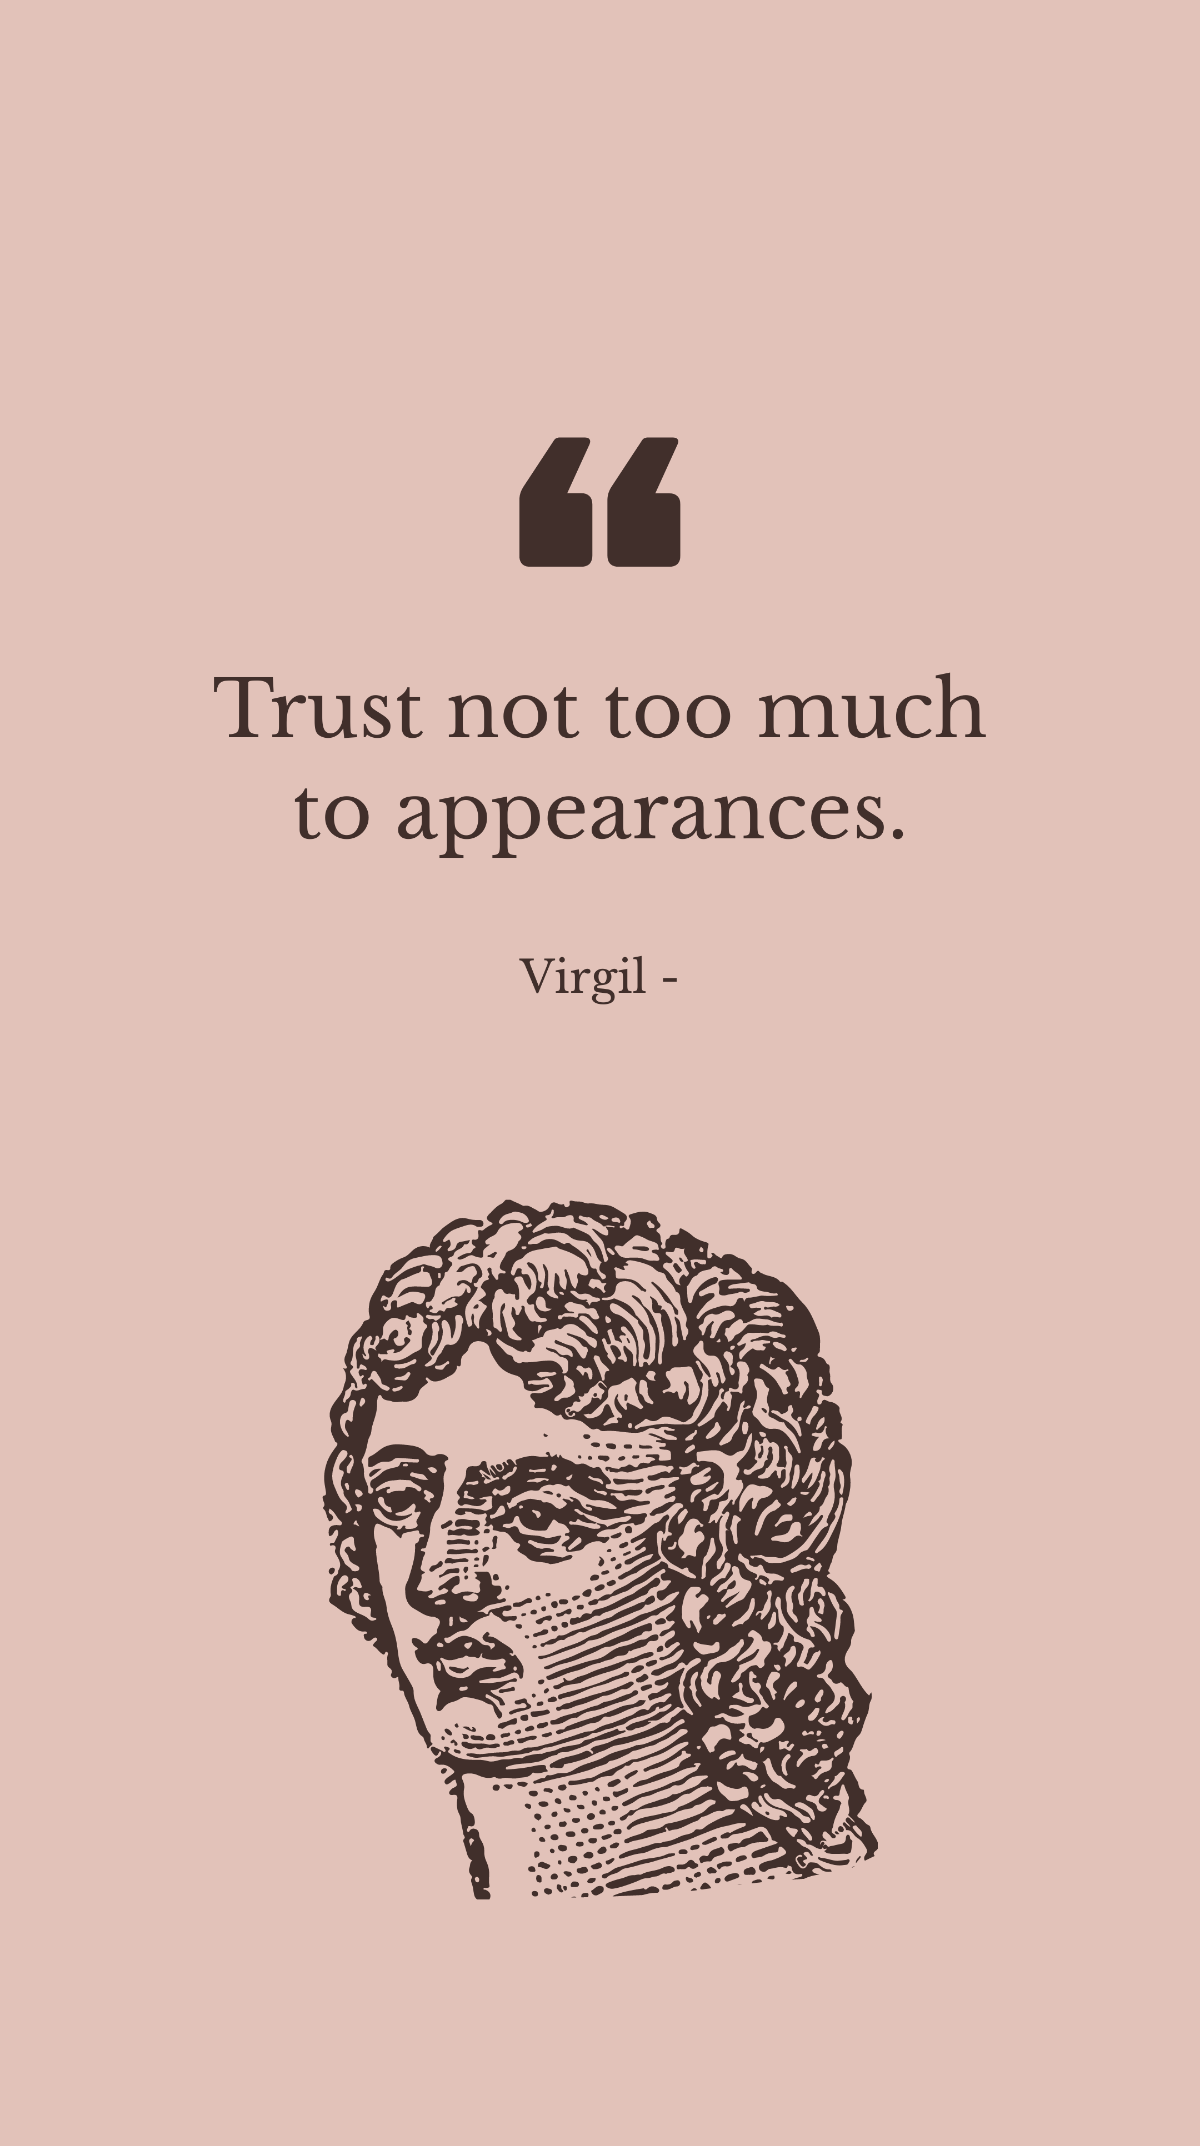 Virgil - Trust not too much to appearances.